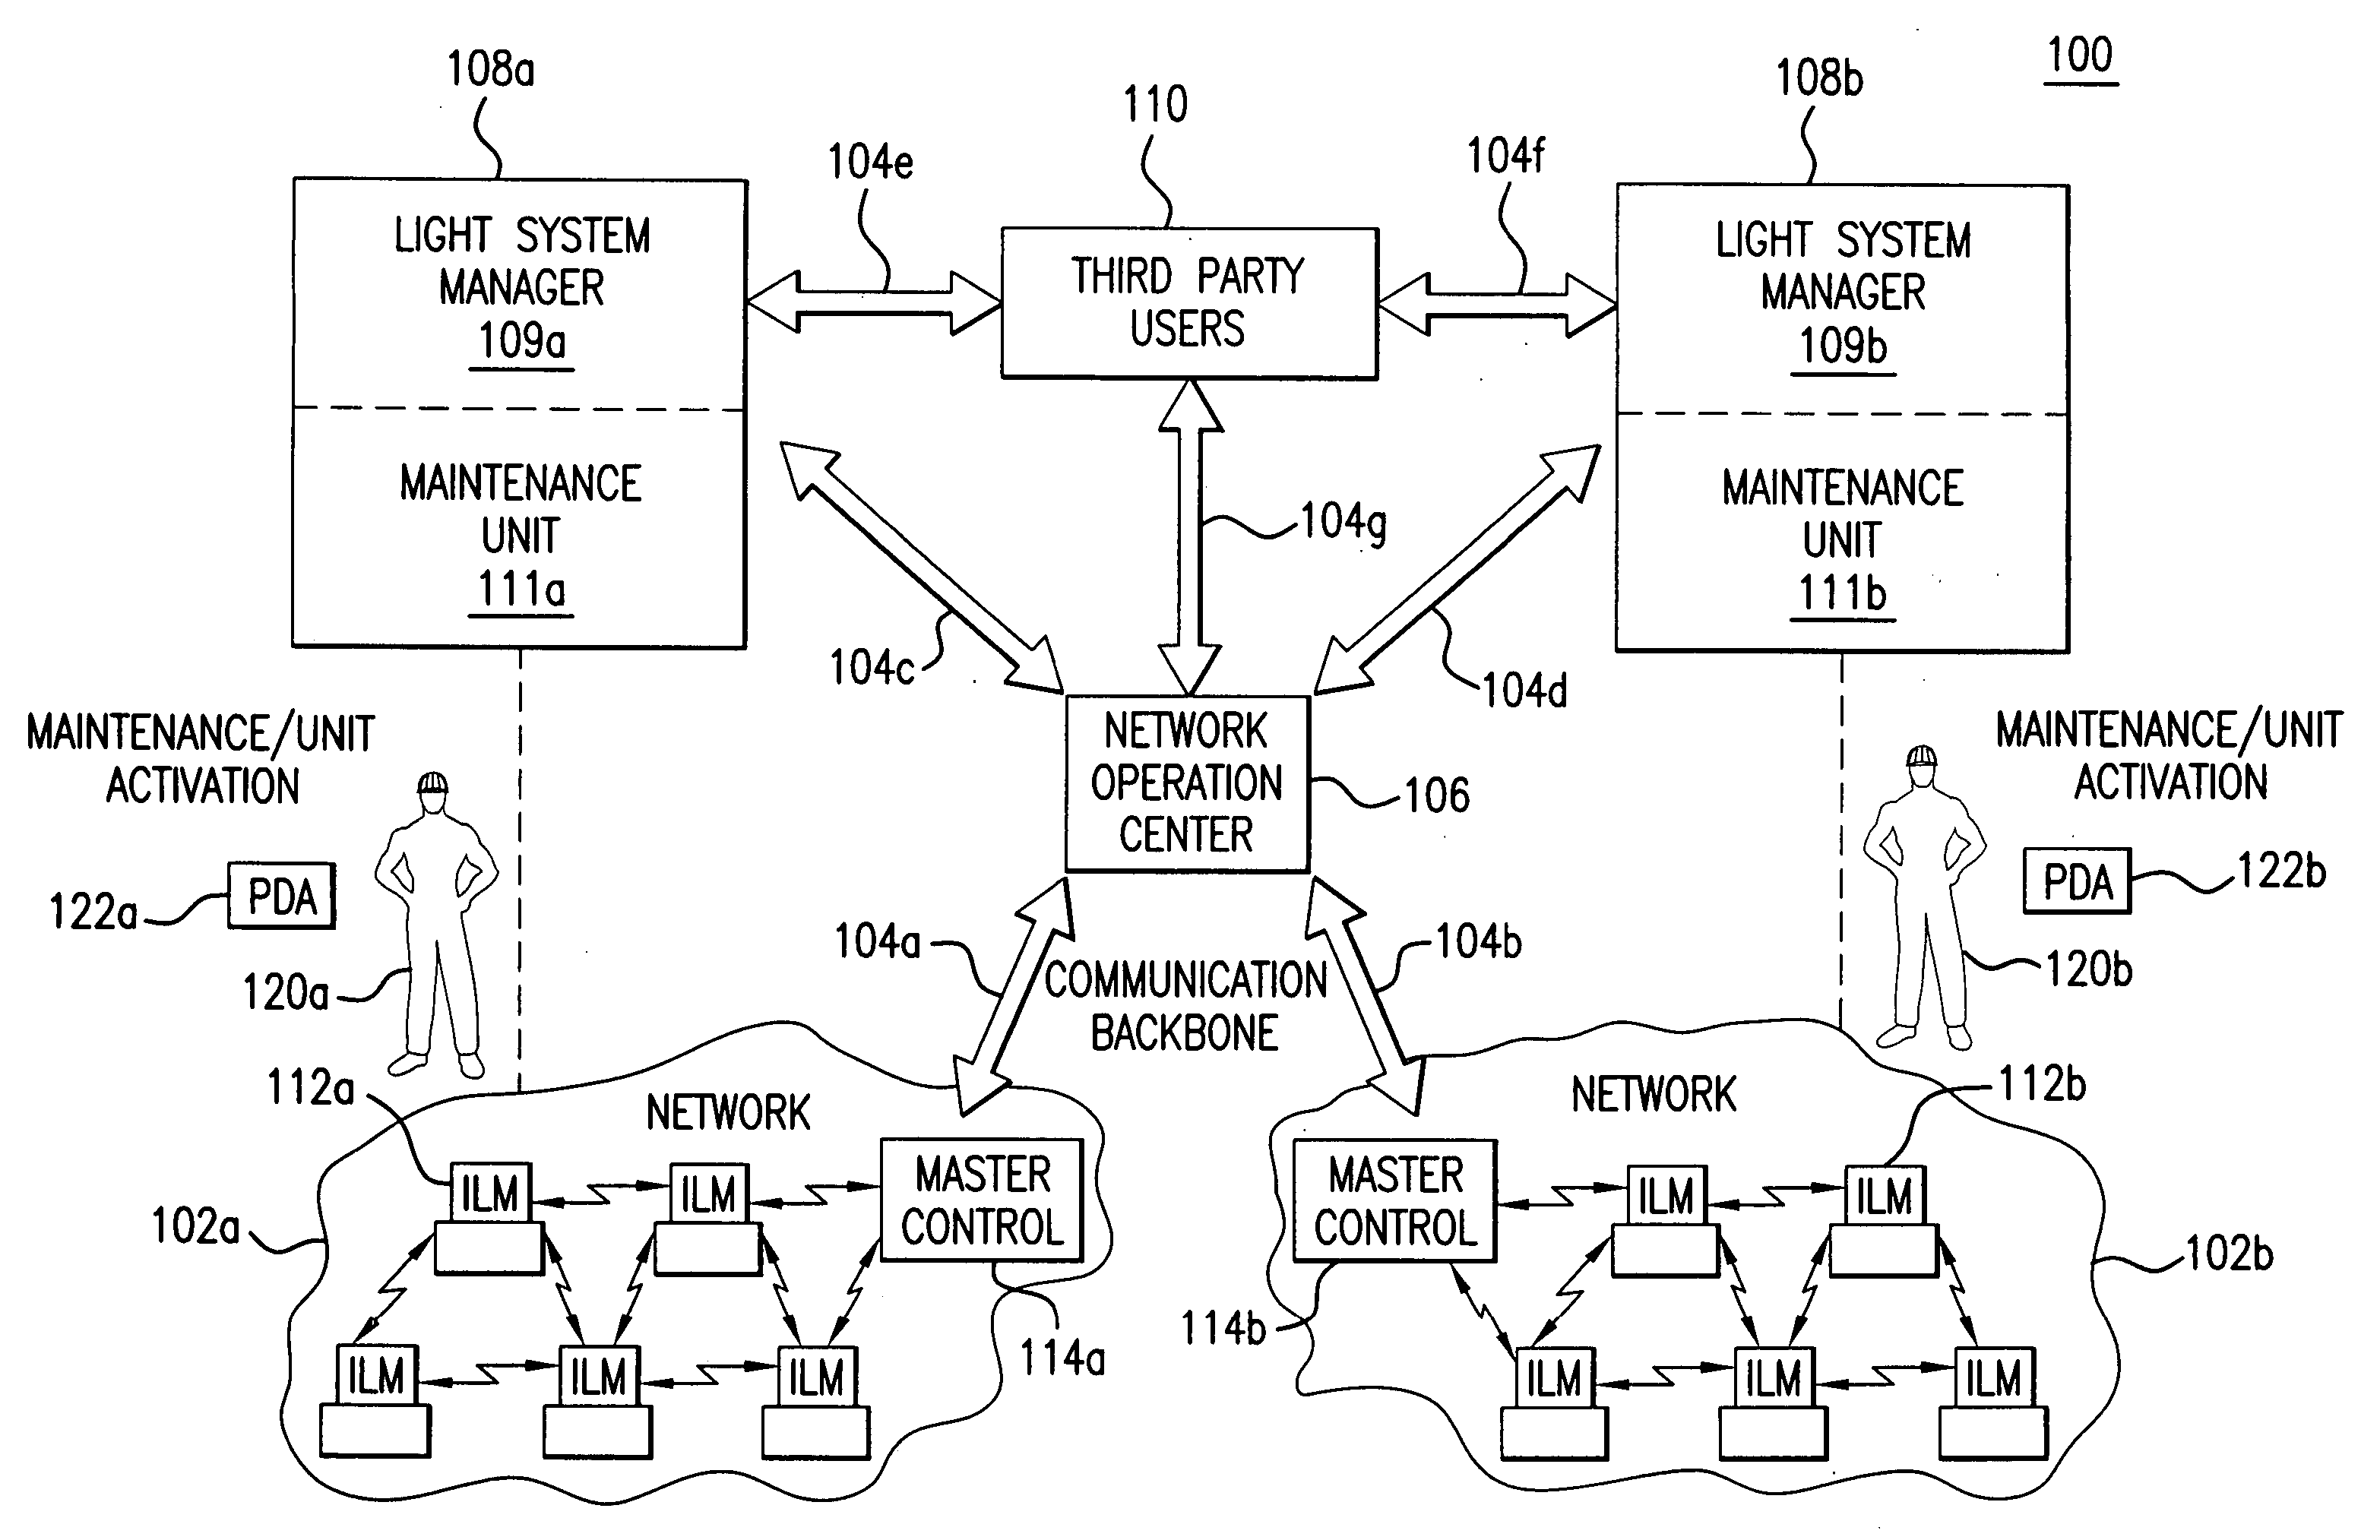 Light management system having networked intelligent luminaire managers that support third-party applications